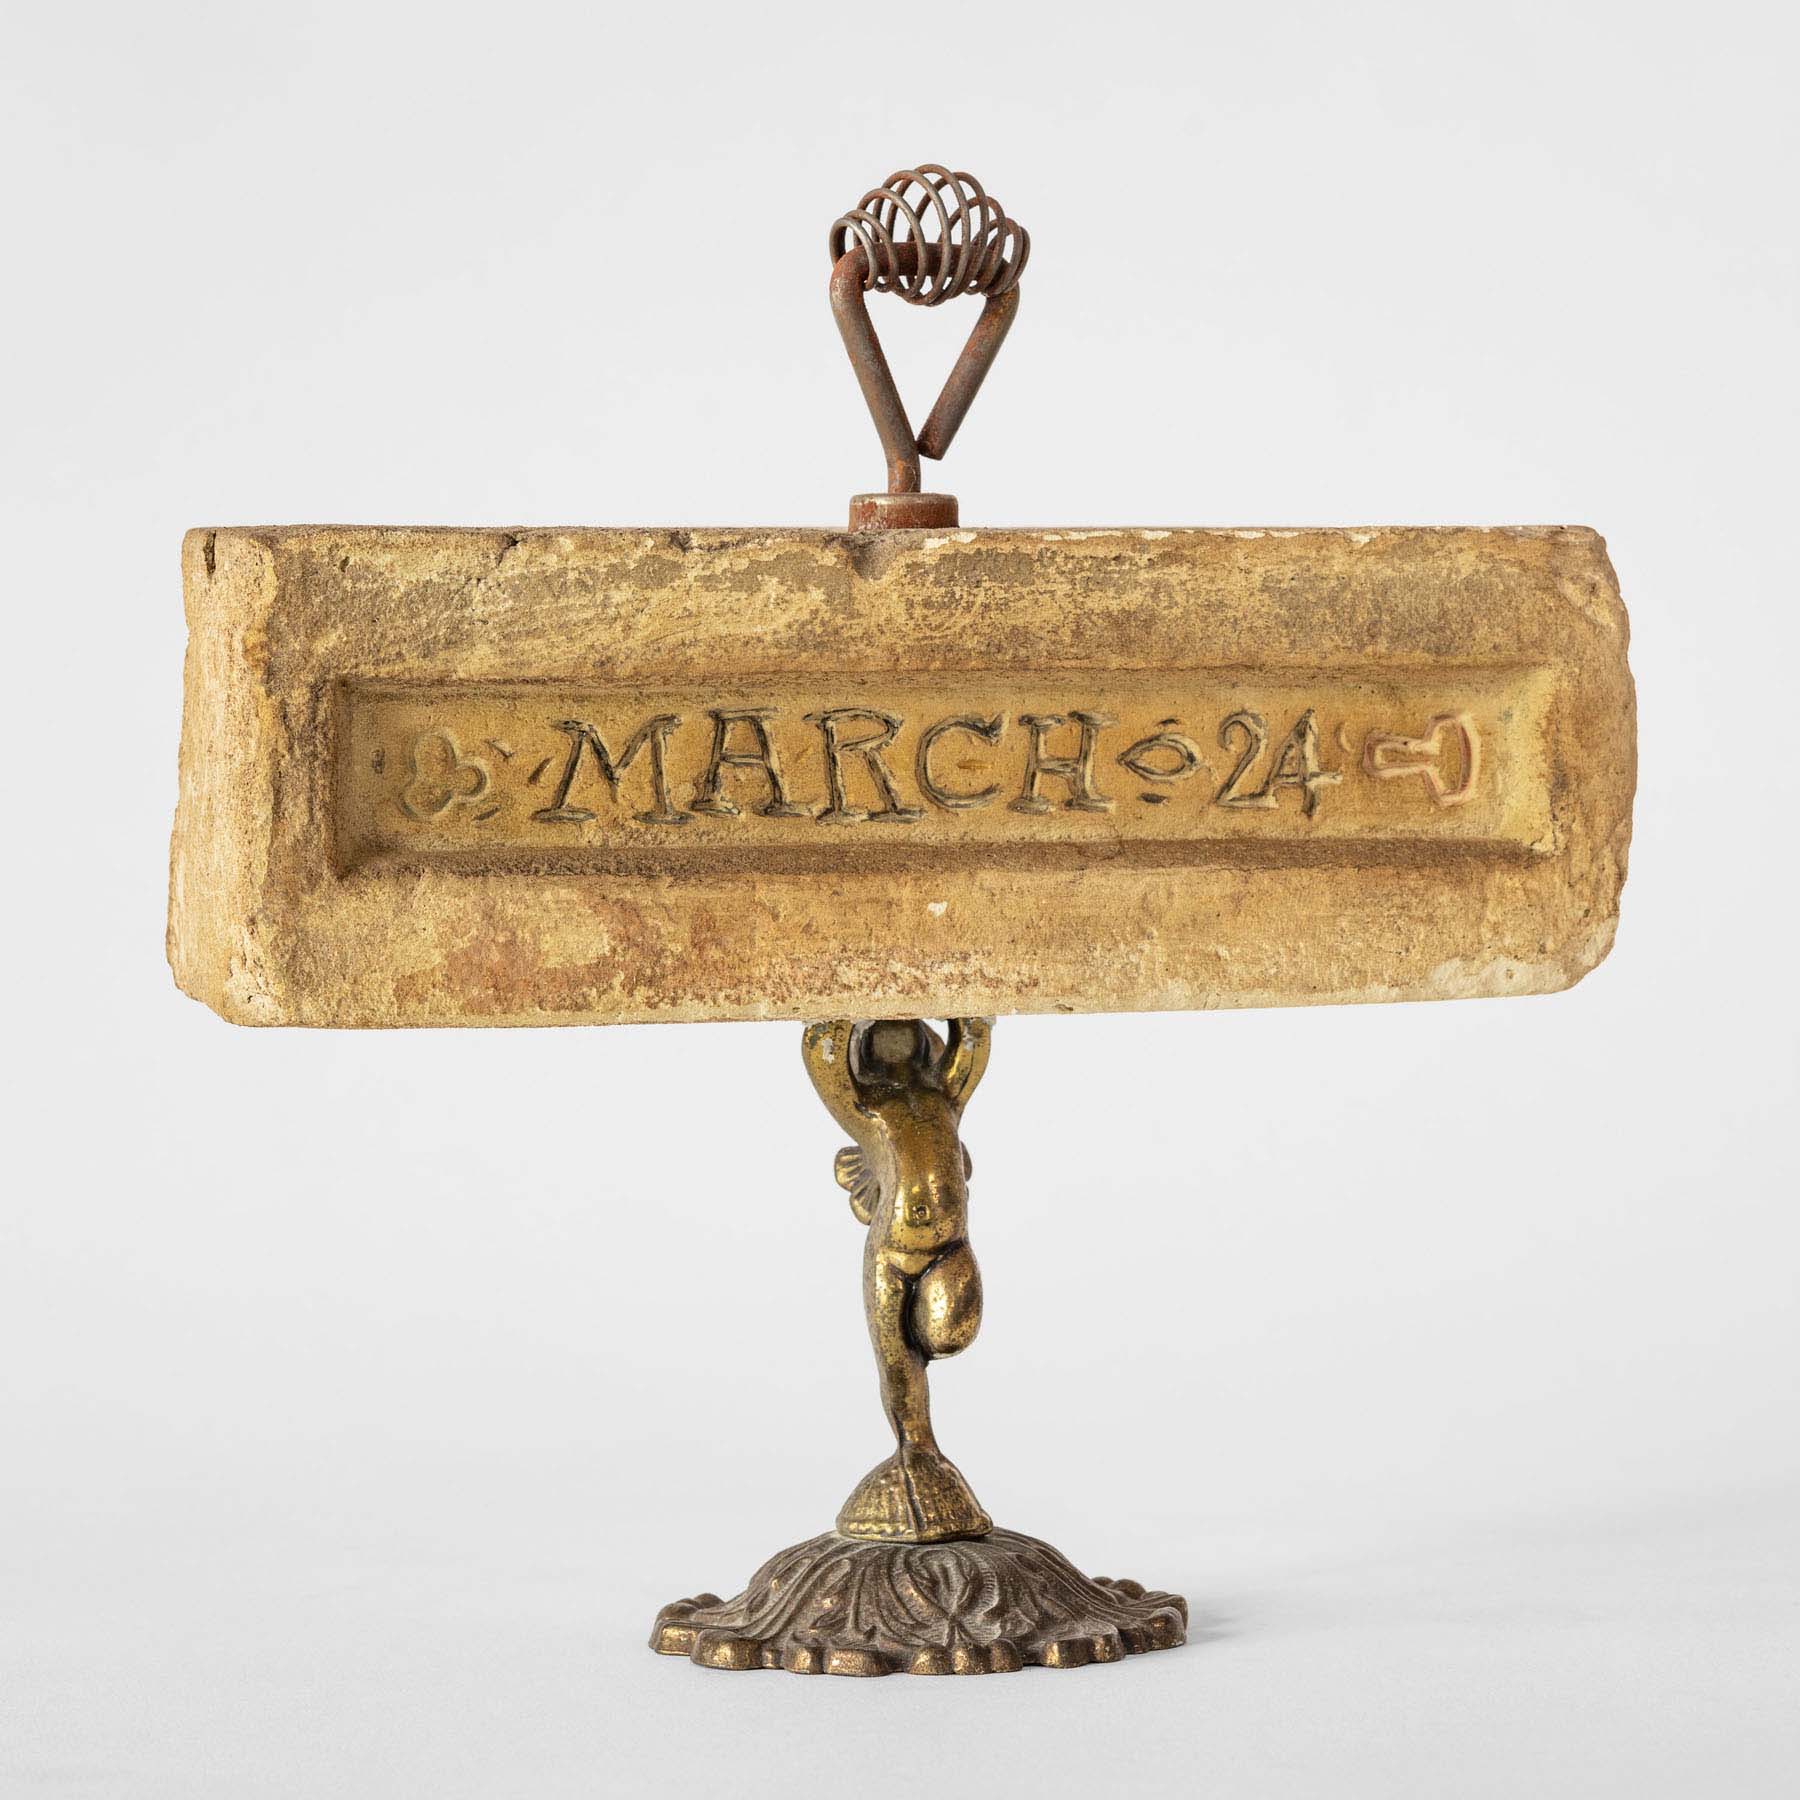 A decorative metal base that supports a cherub holding up a stone brick with “March 24” carved into it.